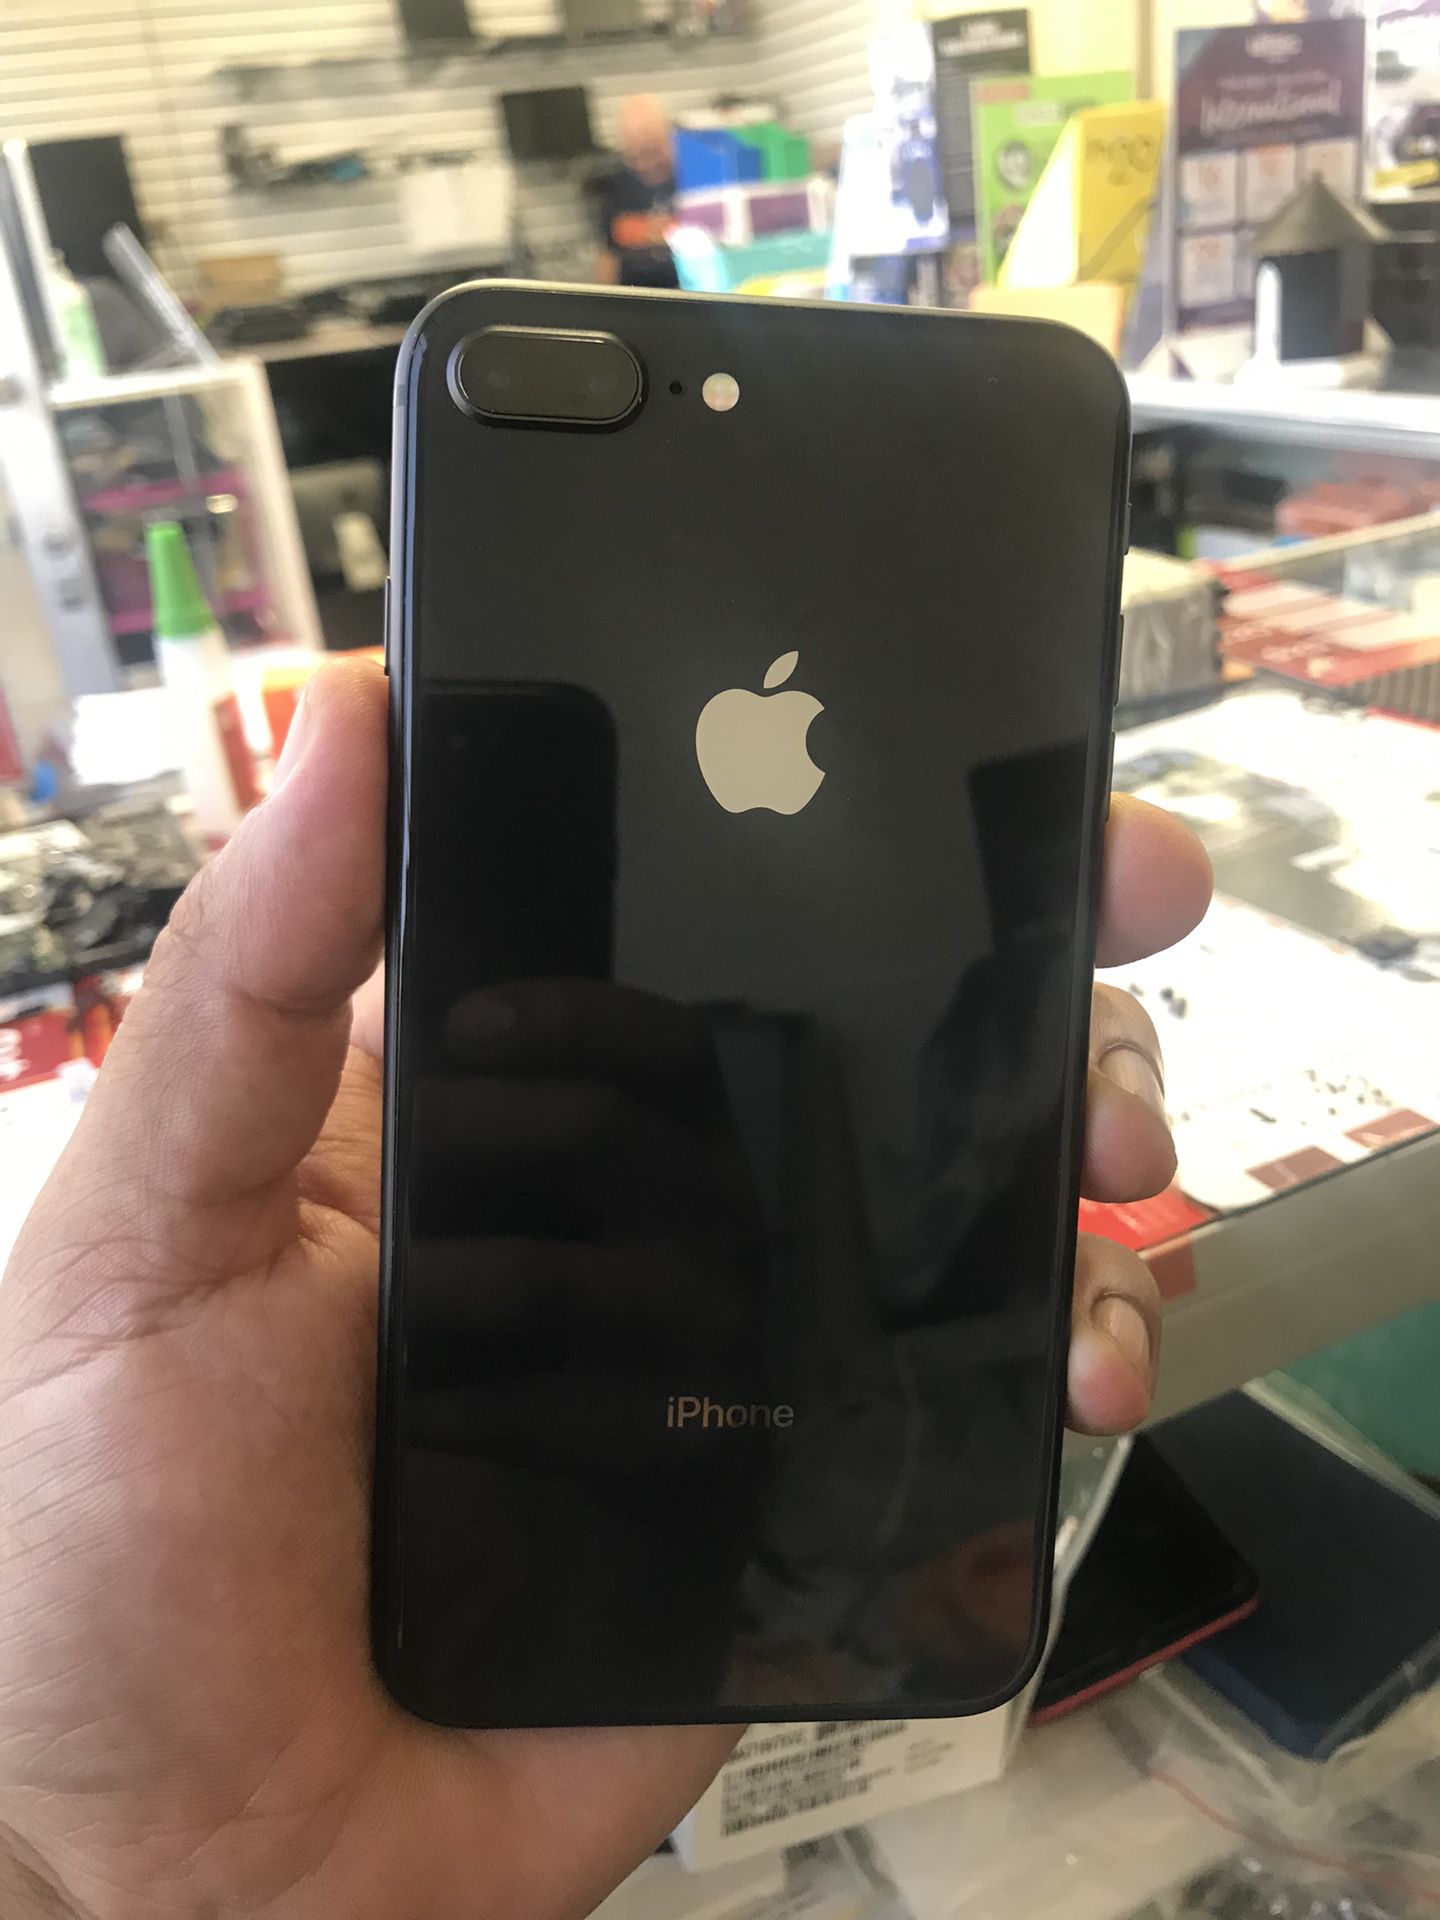 iPhone 8 Plus Unlocked Any Carrier 64 gigs 